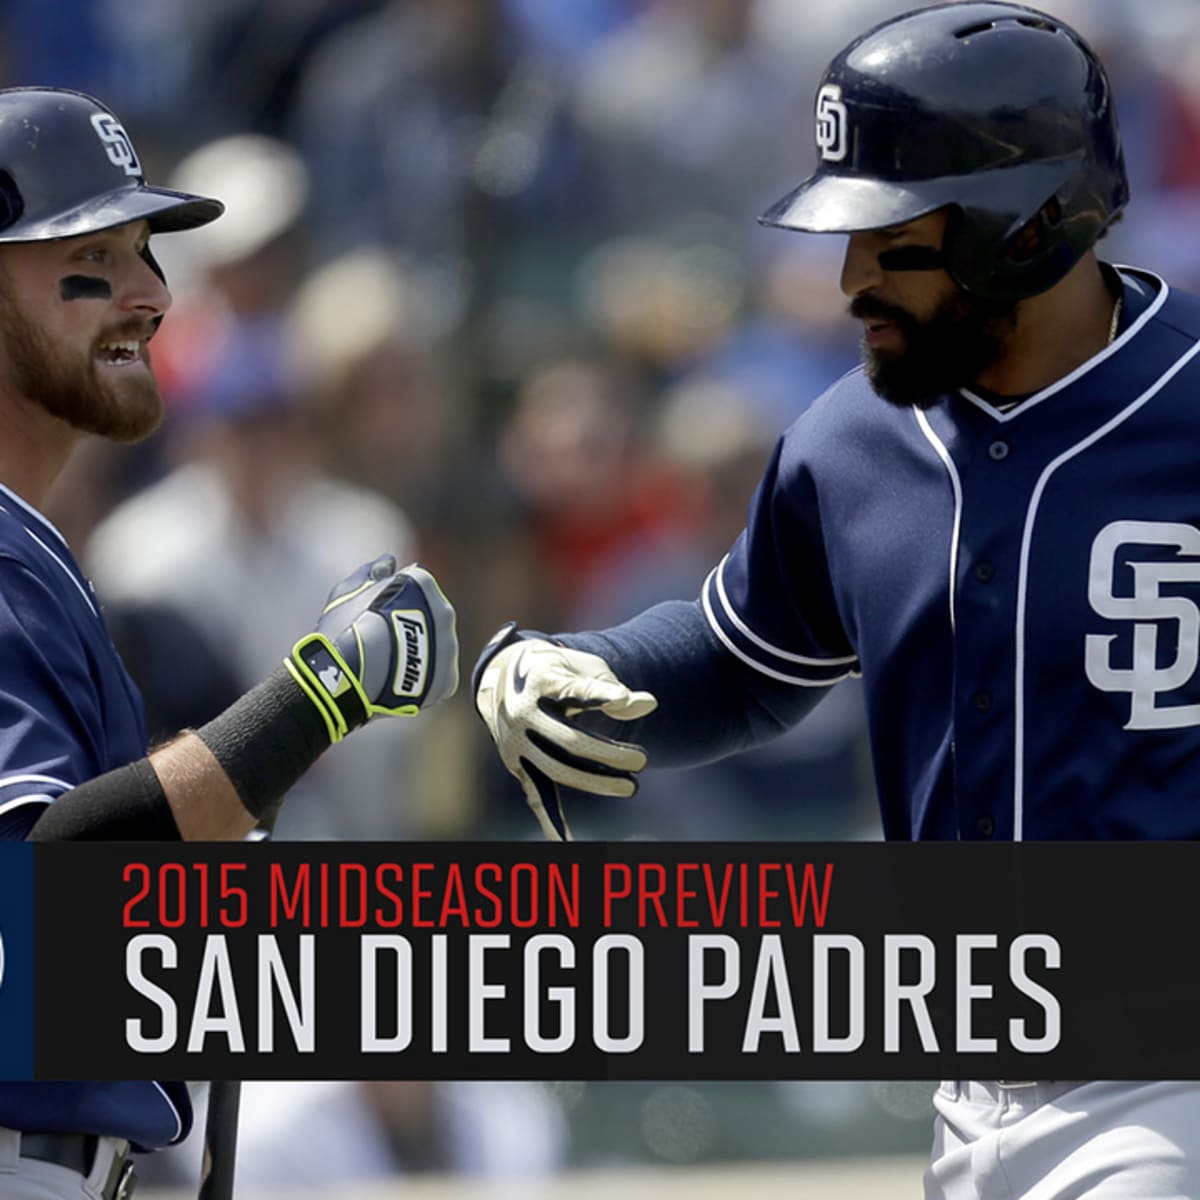 San Diego Padres: 2016 midseason preview - Sports Illustrated